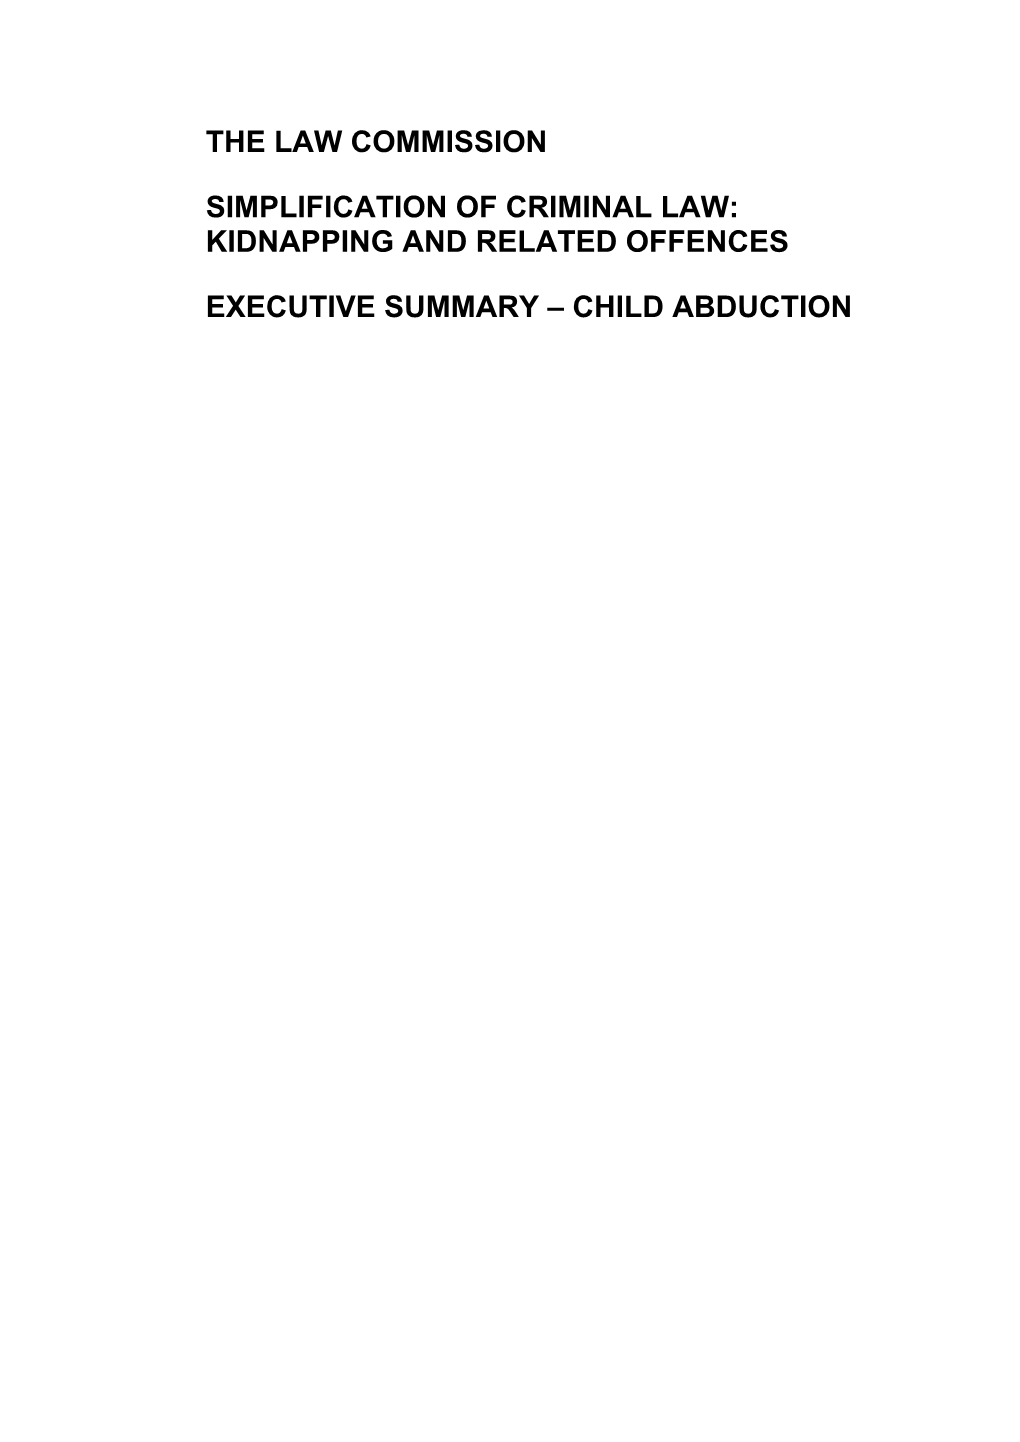 Kidnapping and Related Offences Executive Summary – Child Abduction